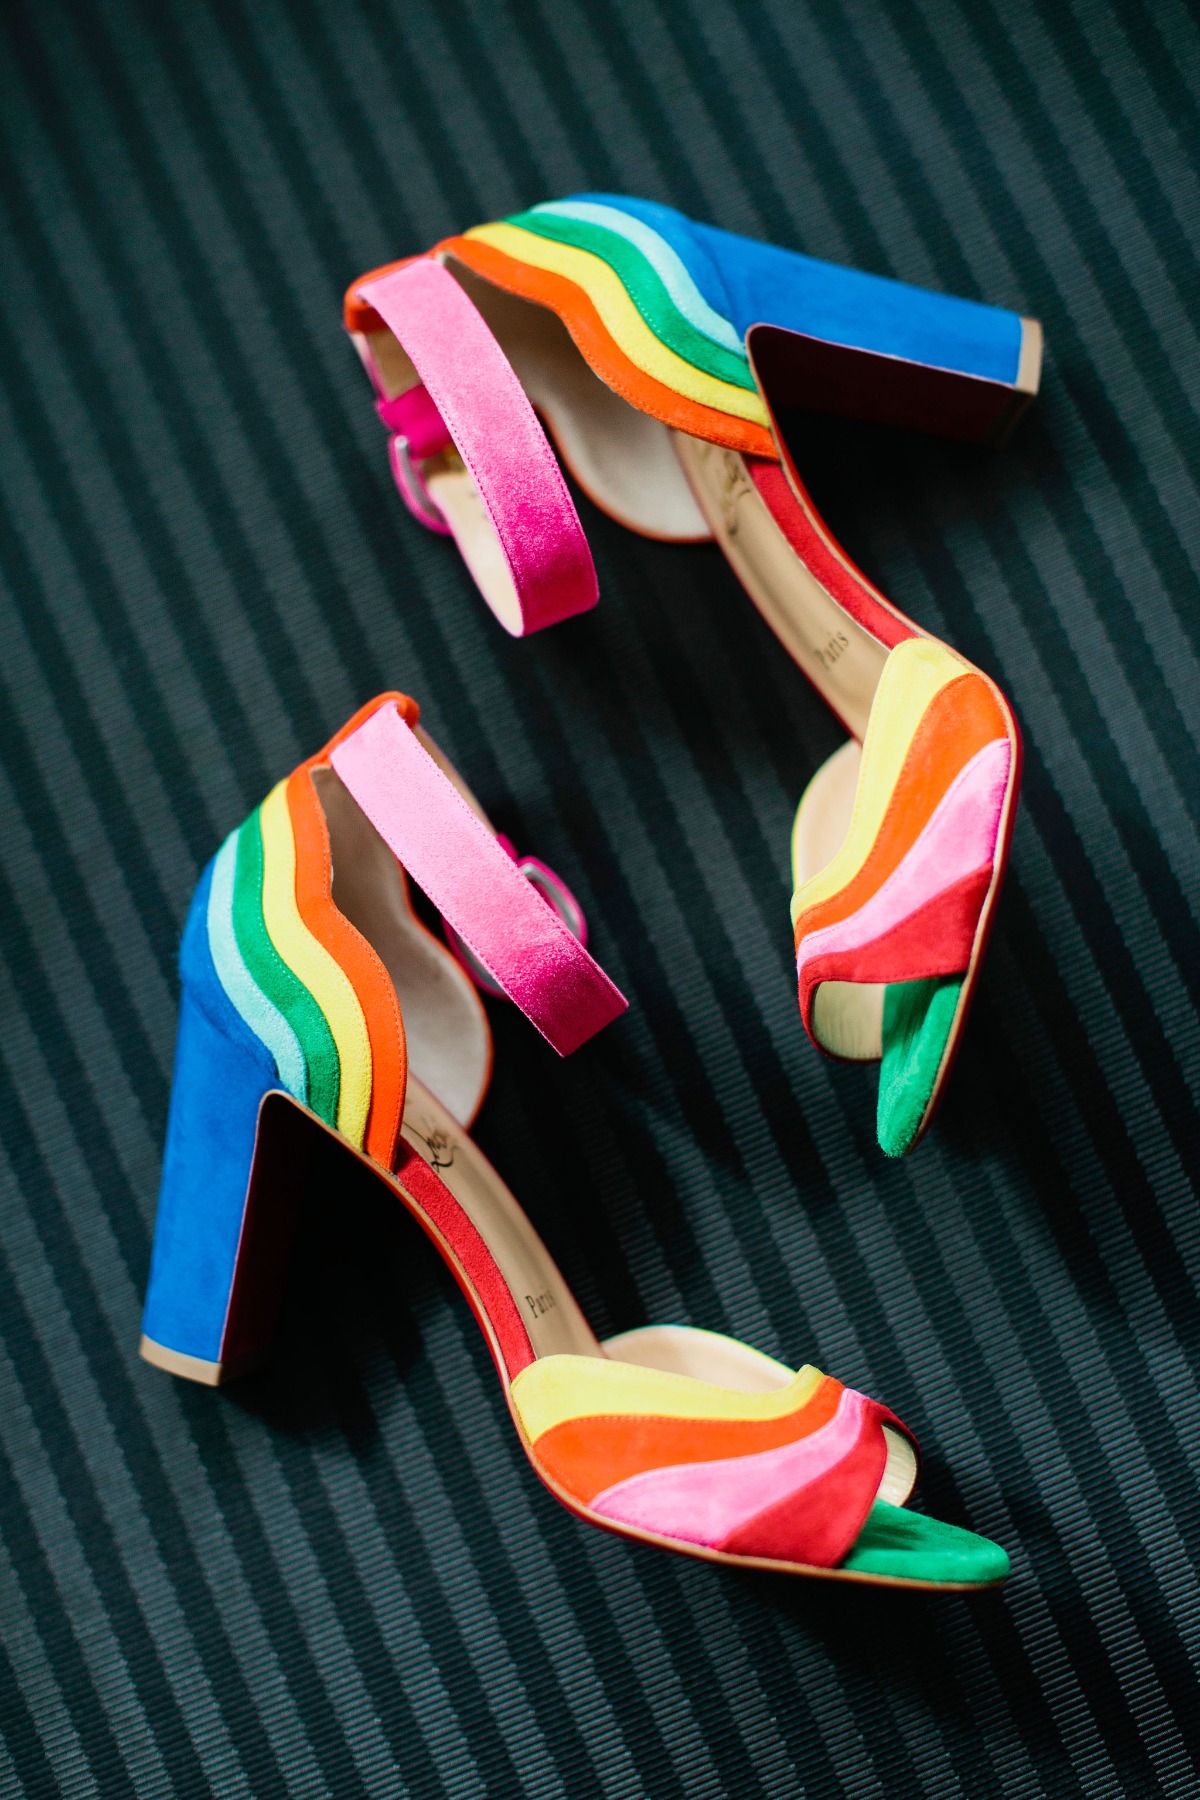 Rainbow Louboutin Shoes Almost Stole the Show at this San Francisco Wedding